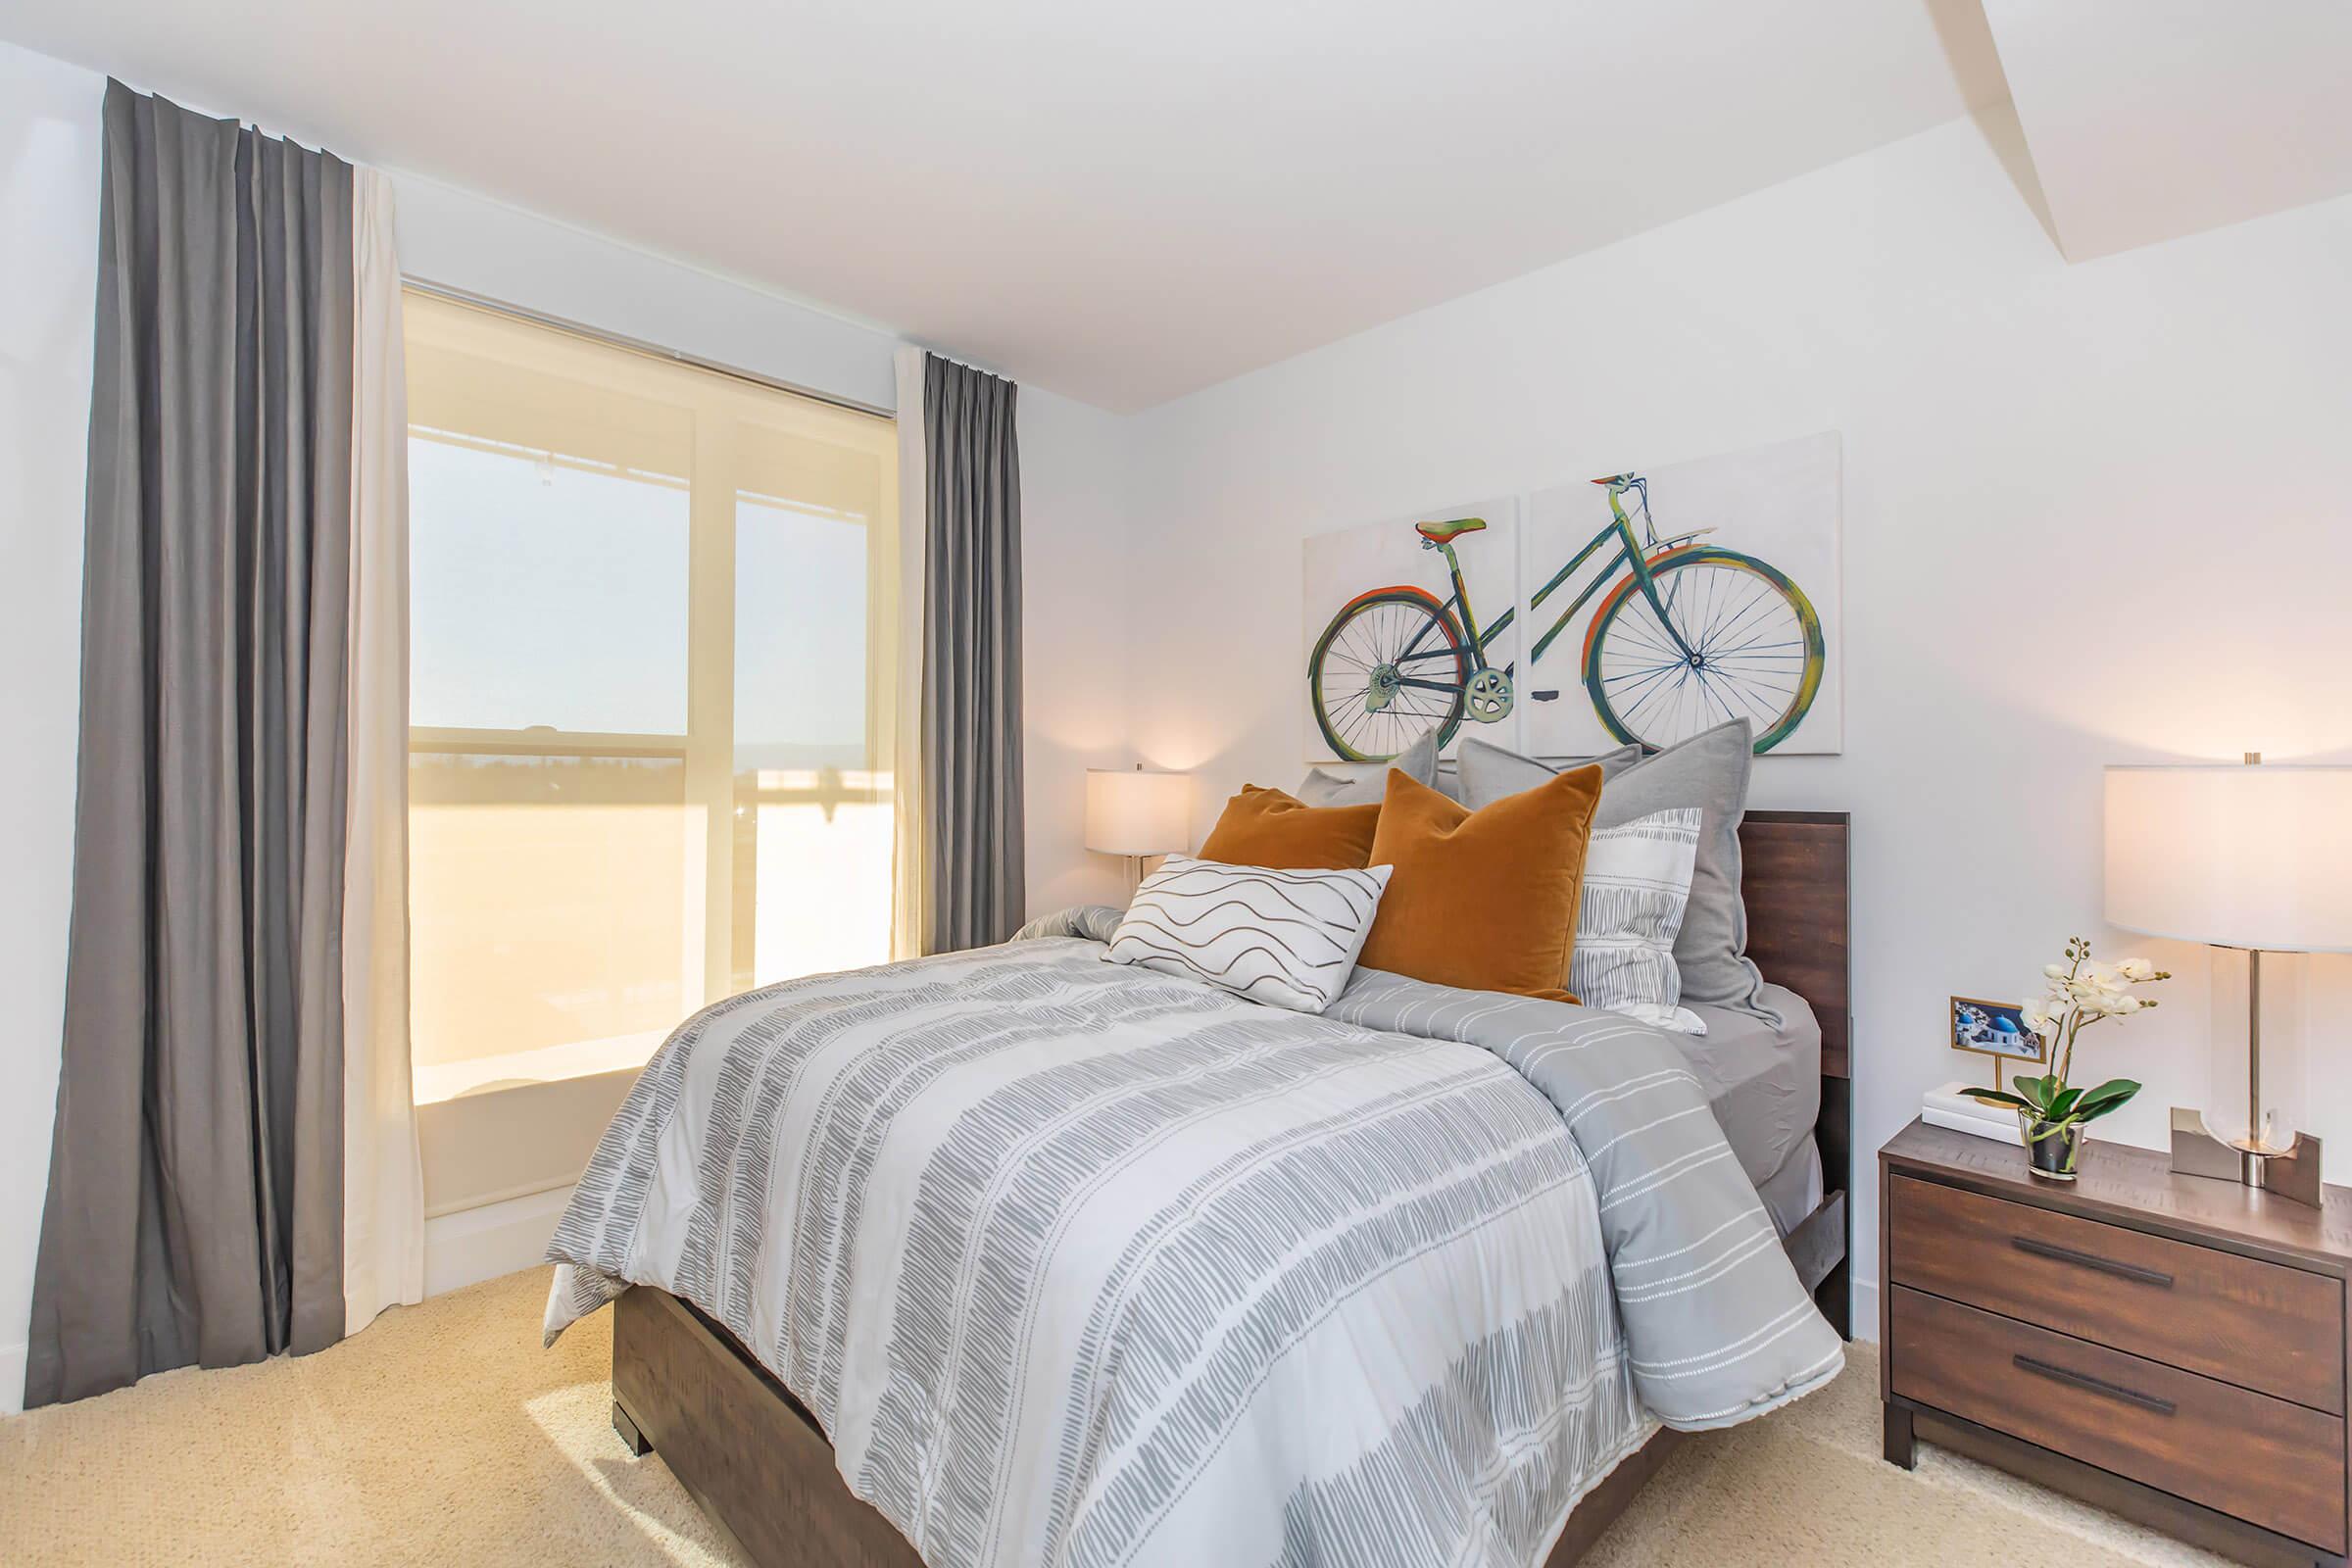 Furnished bedroom with bicycle artwork